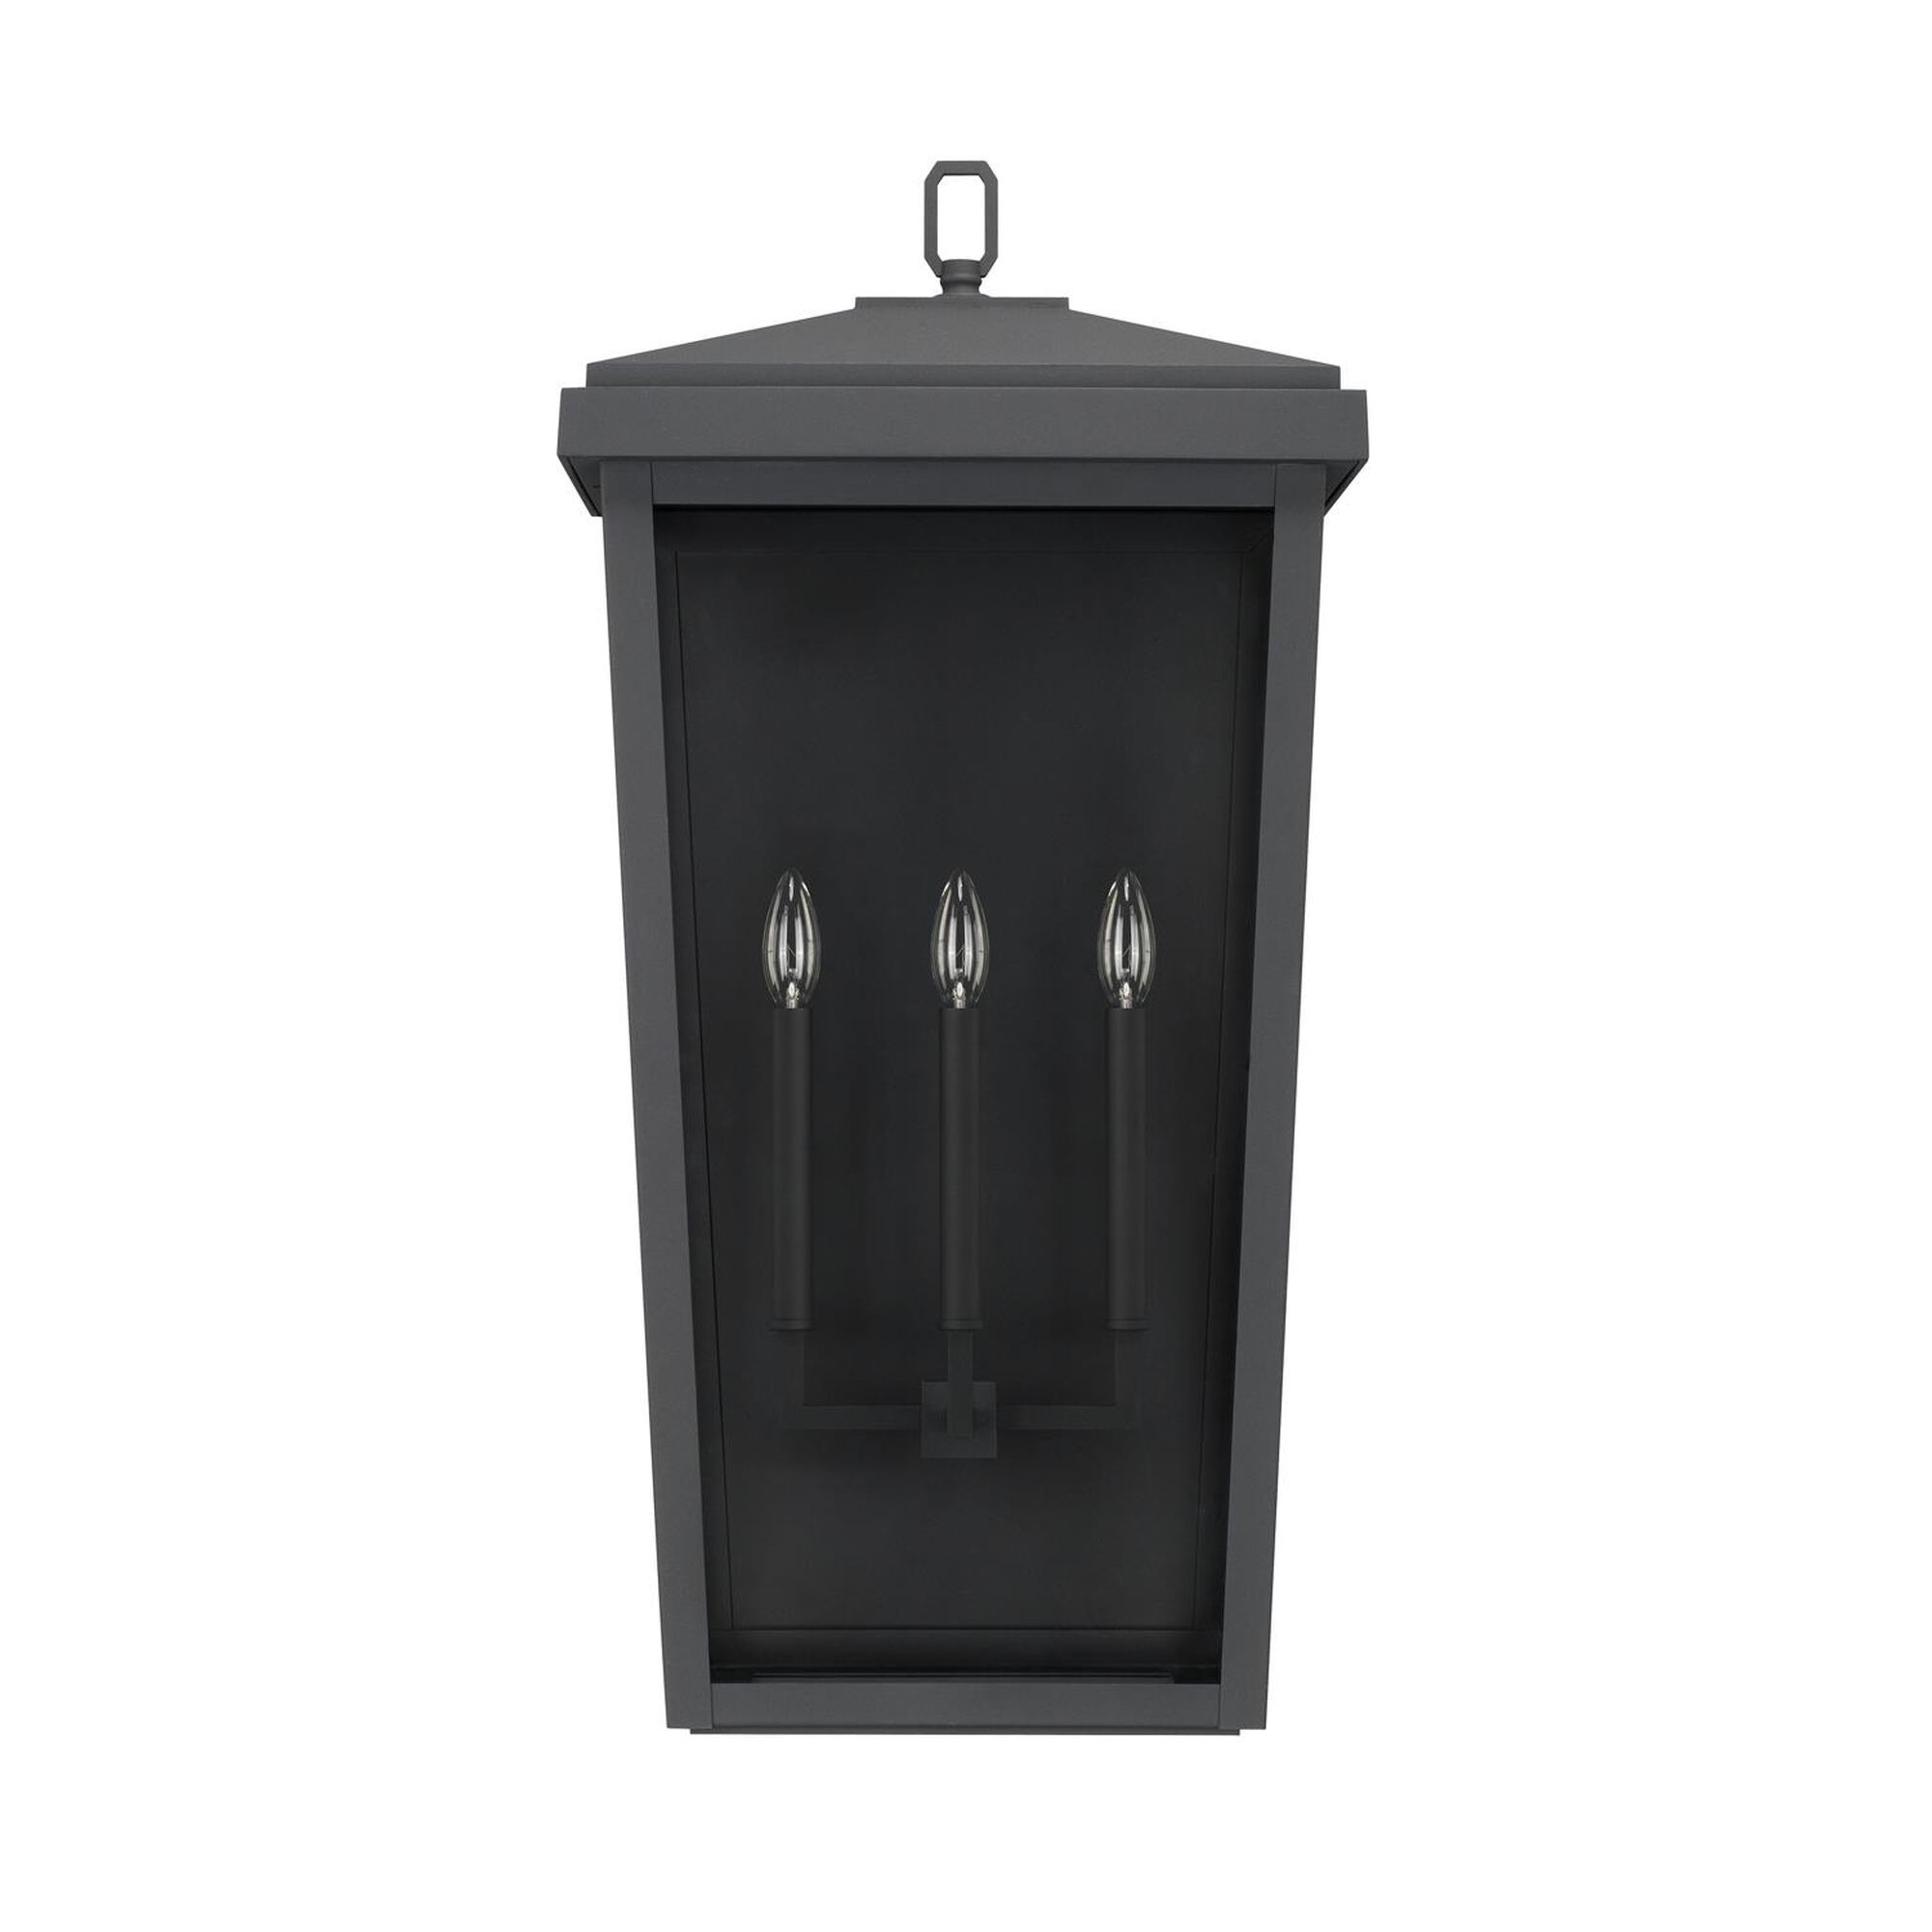 Donnelly 32 Inch Tall 3 Light Outdoor Wall Light by Capital Lighting Fixture Company | Capitol Lighting 1800lighting.com